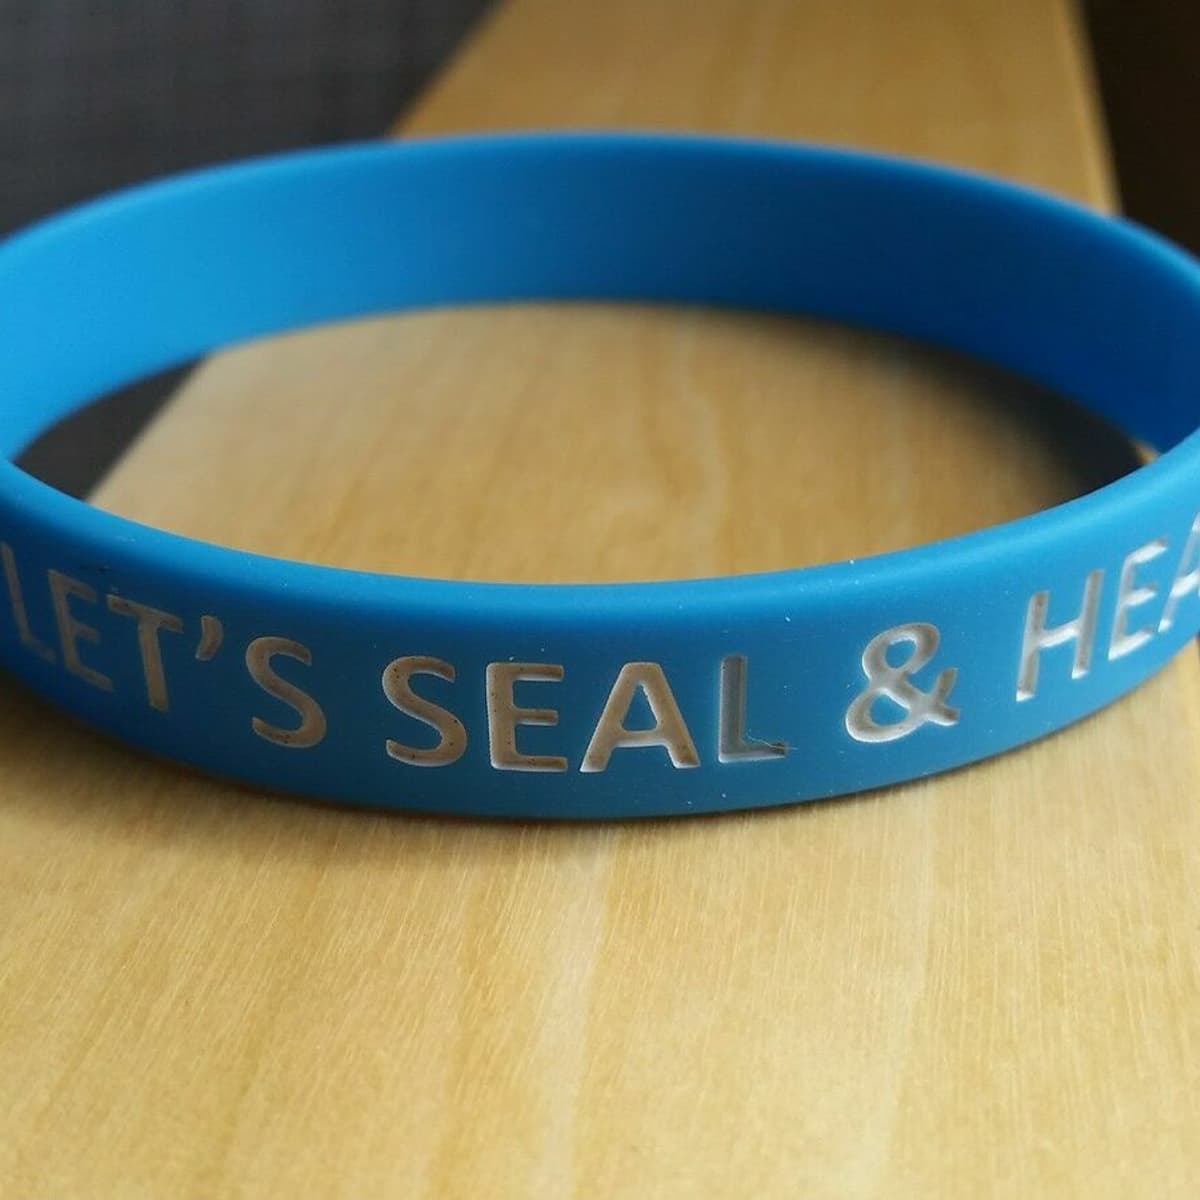 A blue wristband that says "Let's seal & heal".